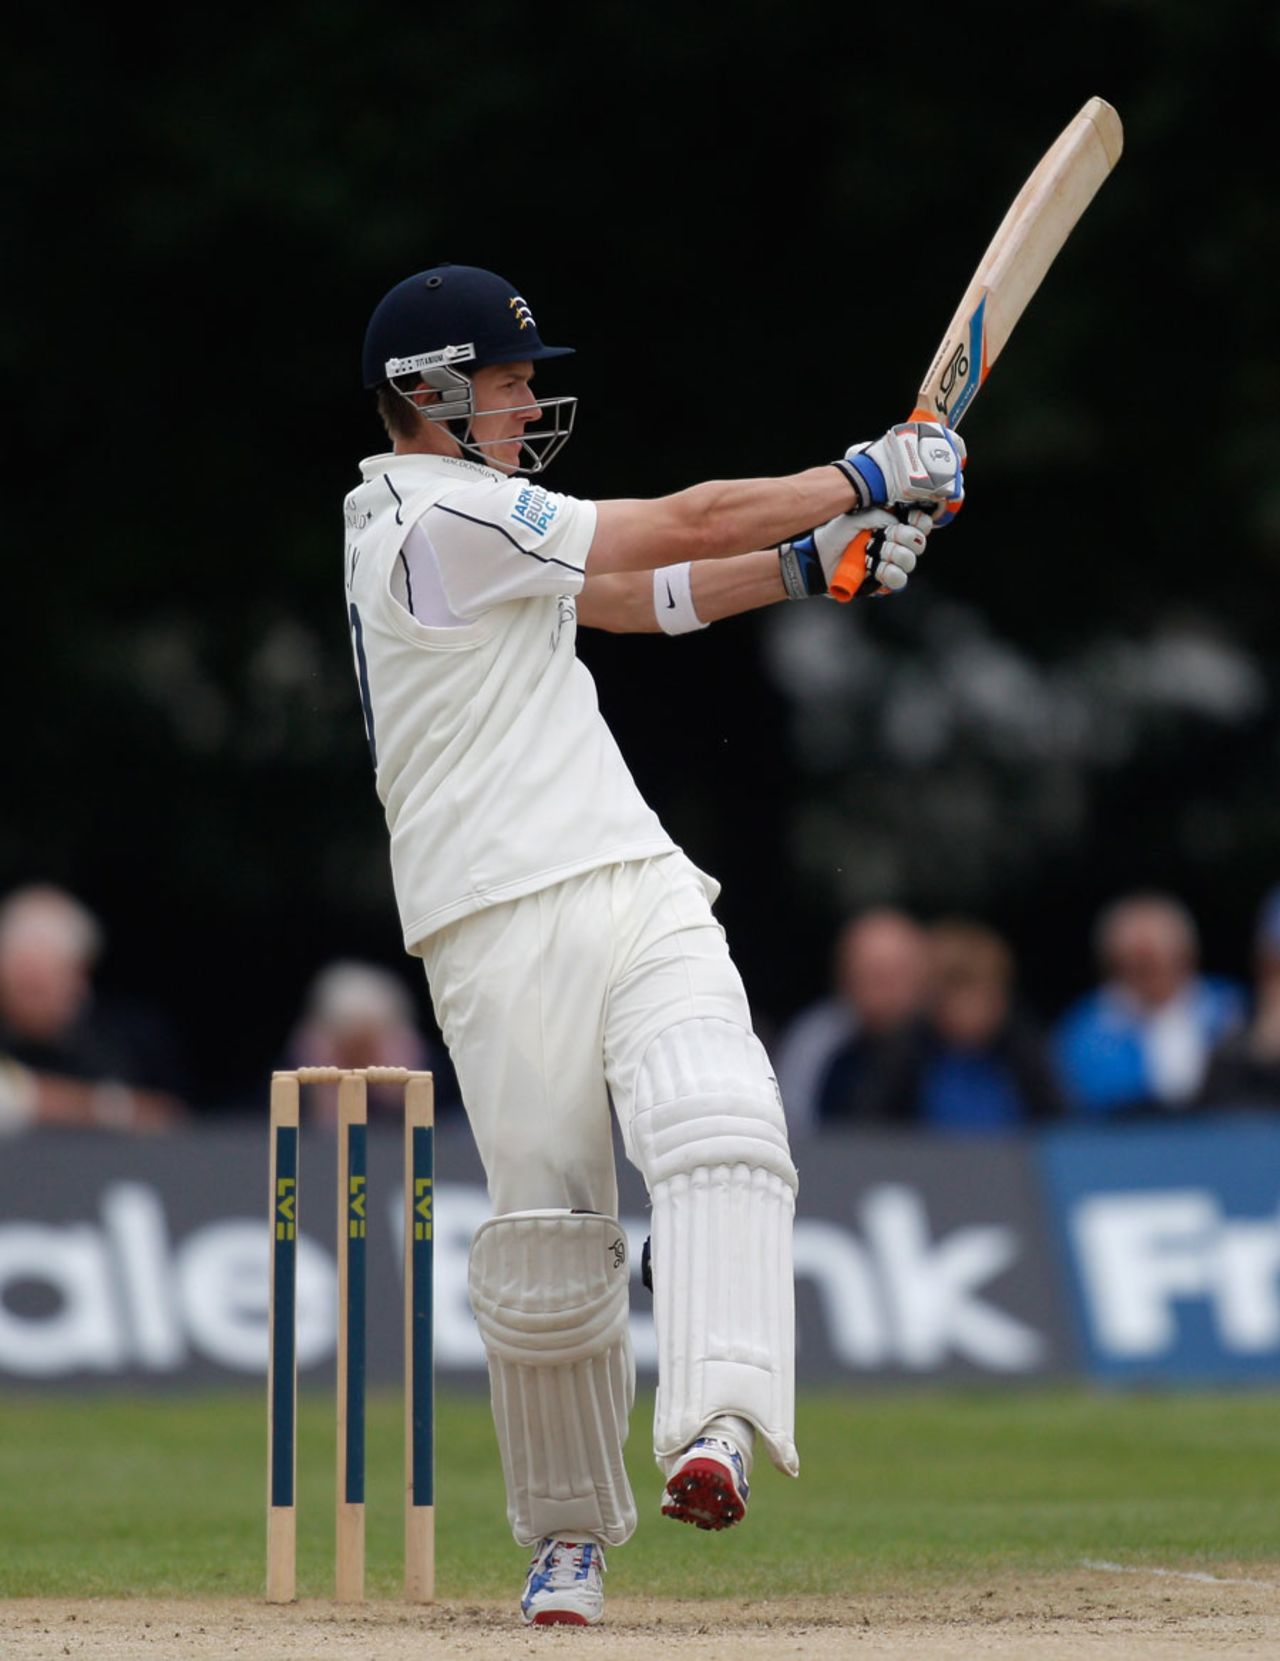 Joe Denly fell five runs short of a century, County Championship, Division One, Uxbridge, 1st day, August 1, 2012